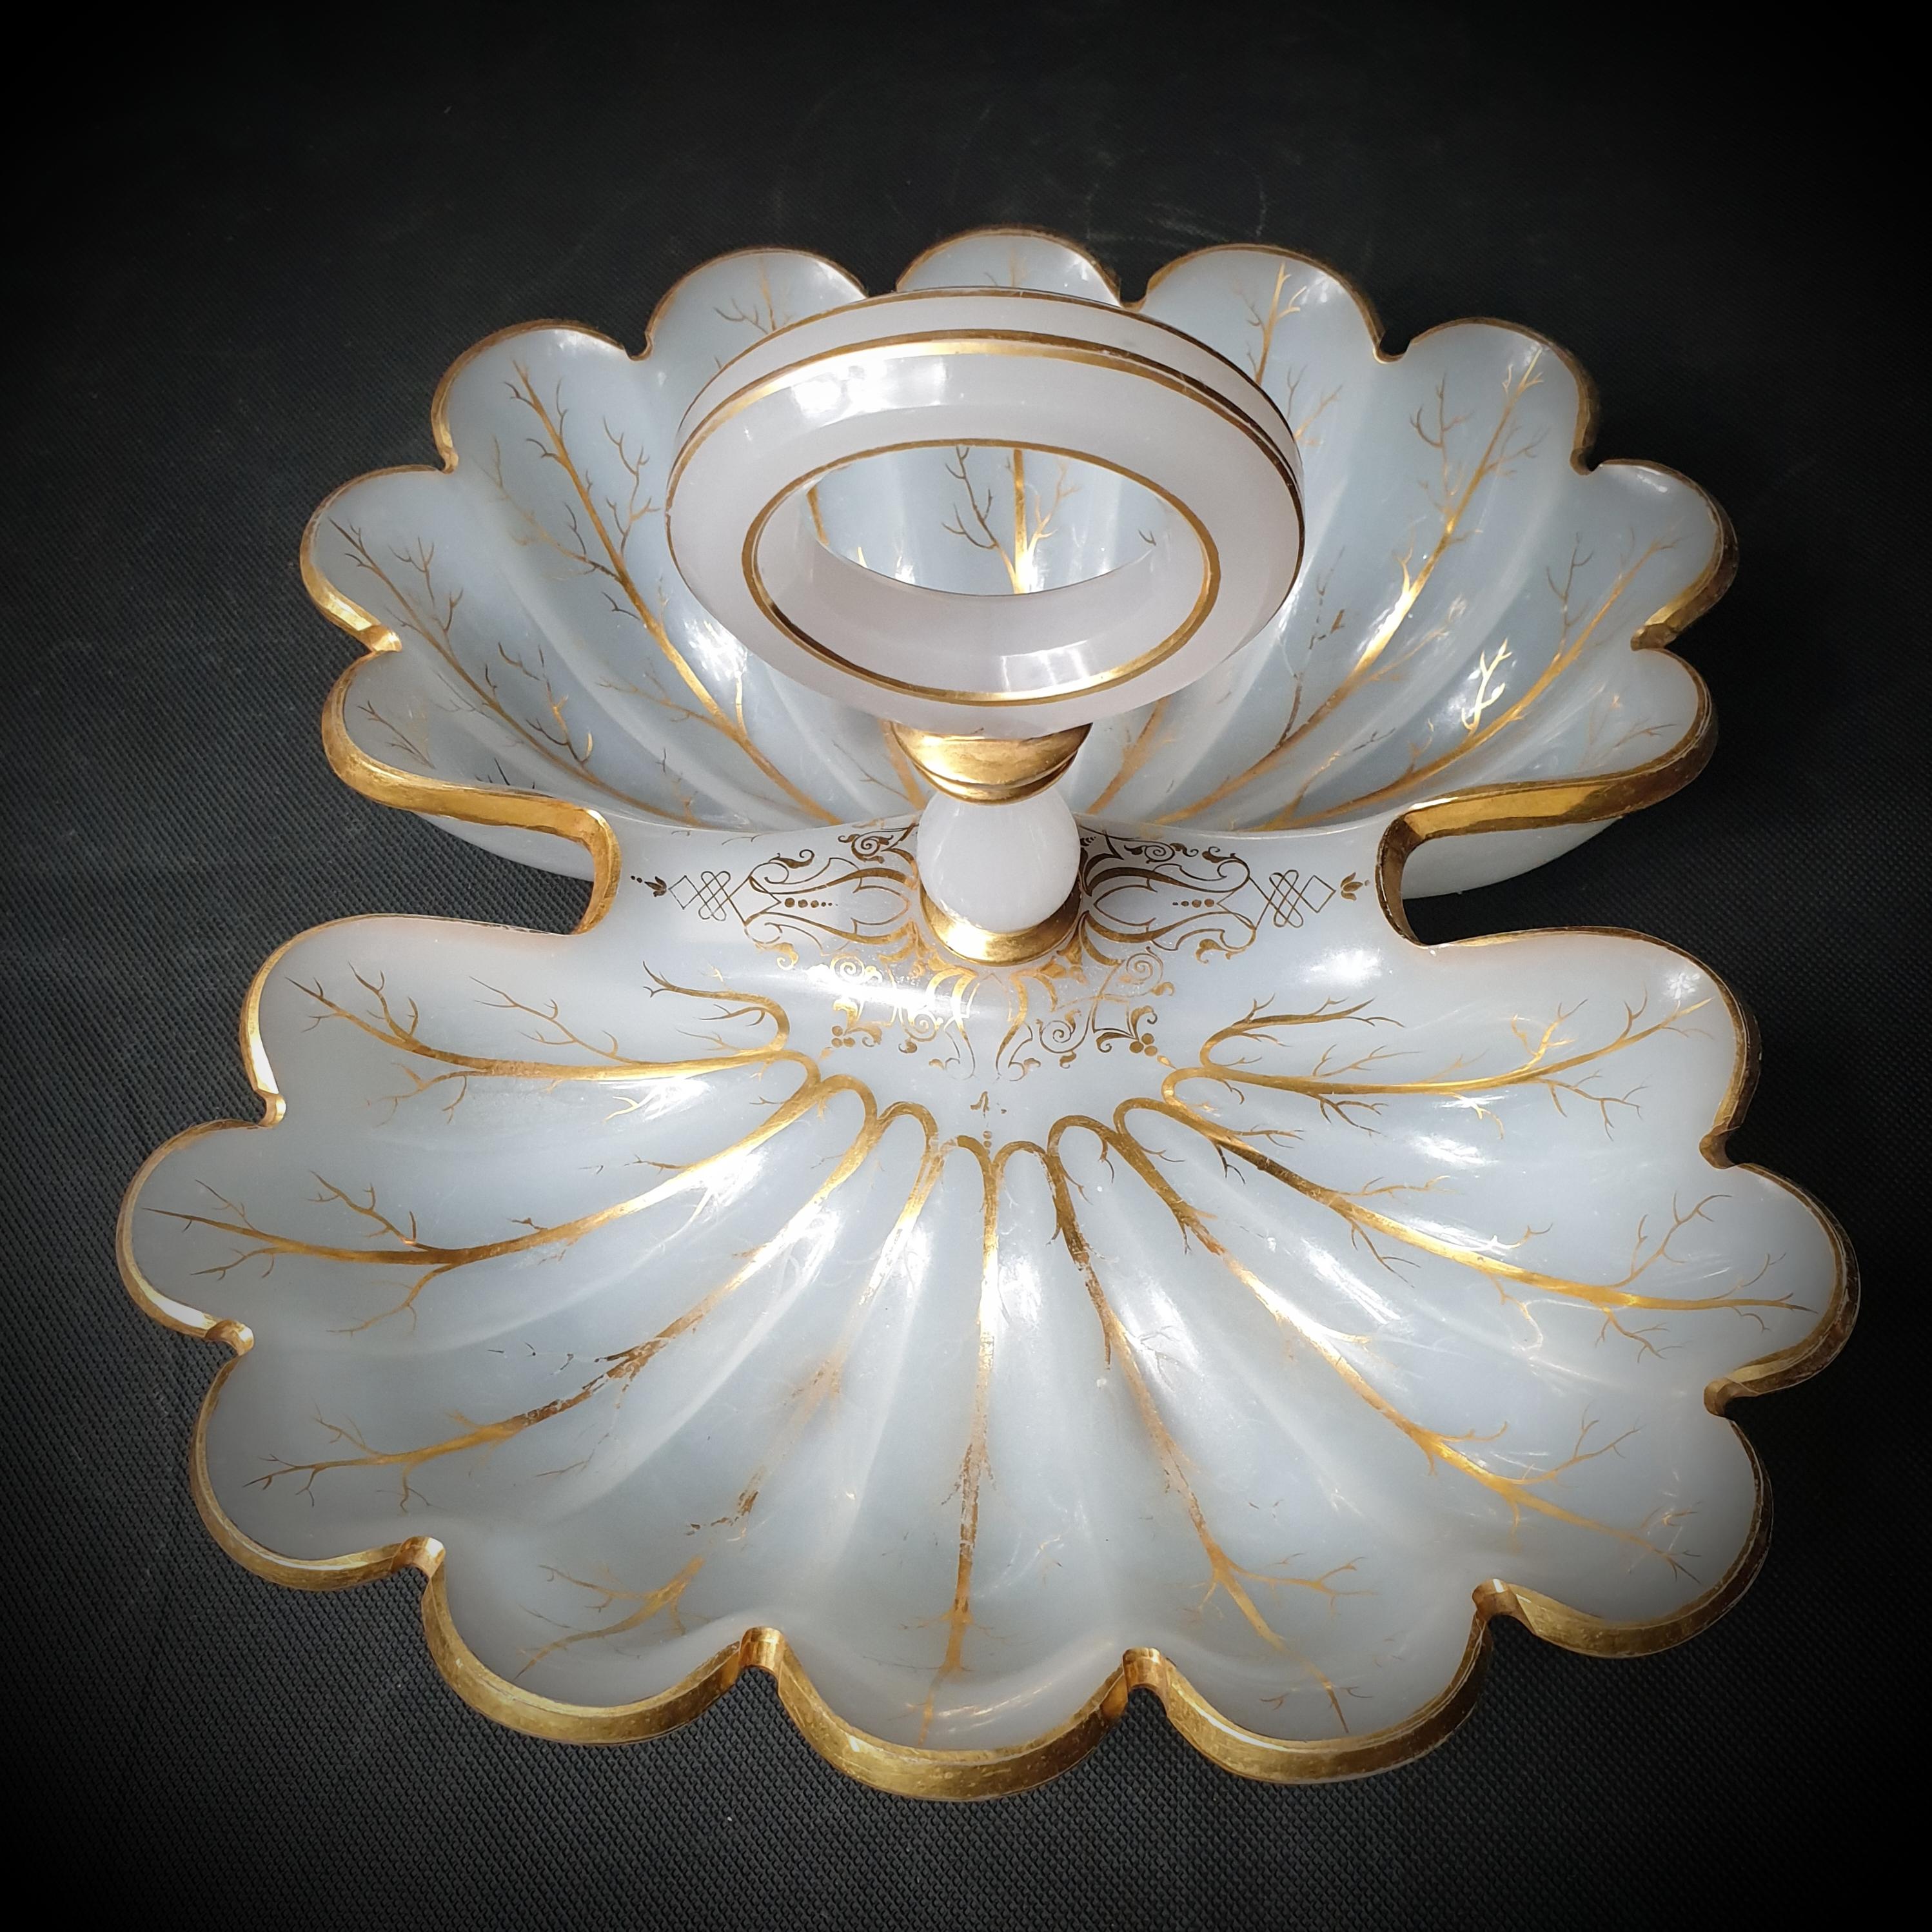 Presenting an excellent display of French history: the kidney-shaped, double scallop-shell, transparent, gilded, milky-white Opaline glass serving dish. With its elaborate pattern and delicate elegance, this serving dish is certainly a work of art,